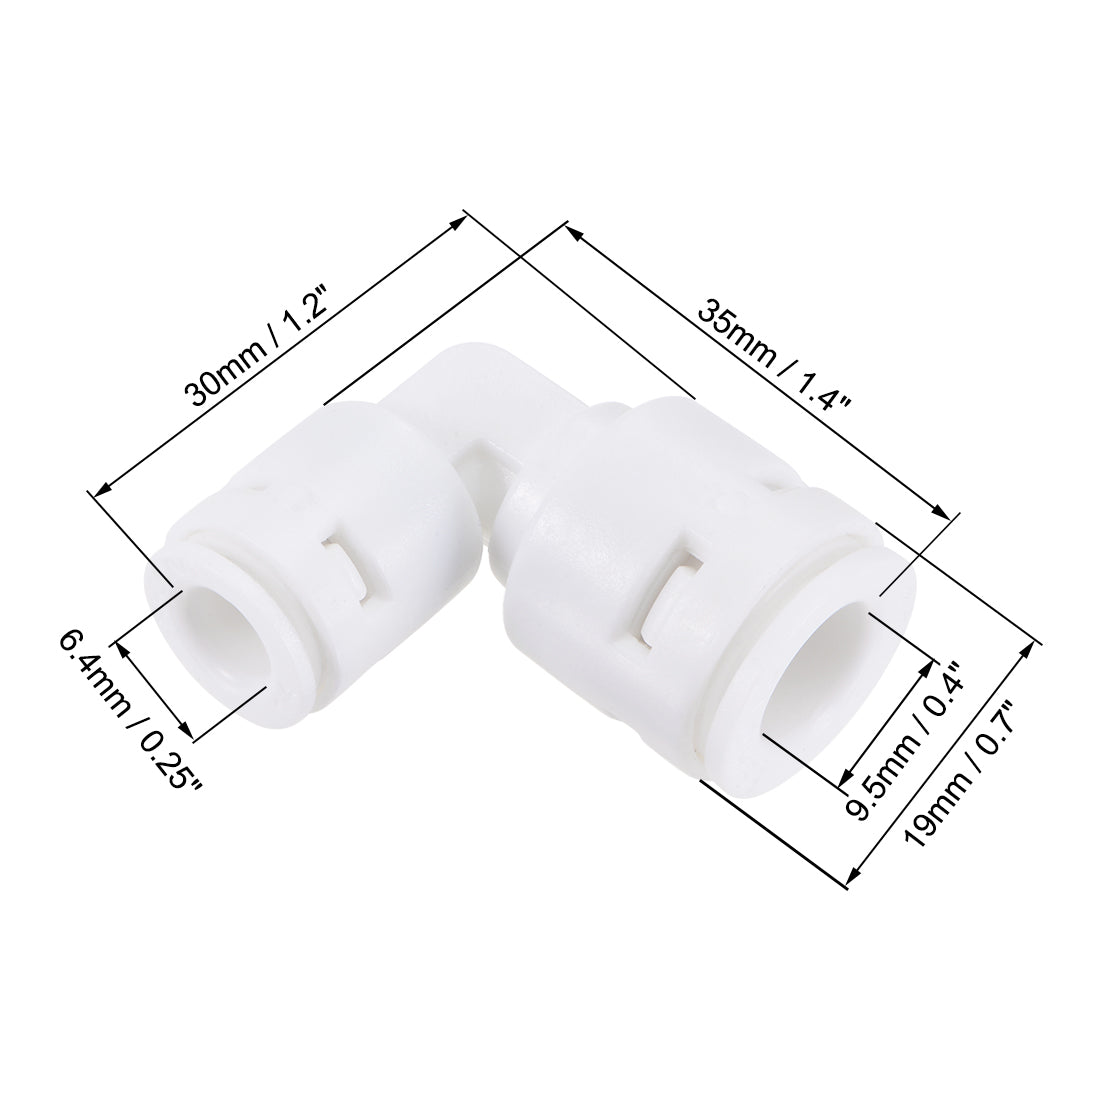 uxcell Uxcell Quick Connector L Type 1/4" to 3/8" Push Fit Elbow Connect Fittings for Water Purifier, 35x30mm White 2Pcs